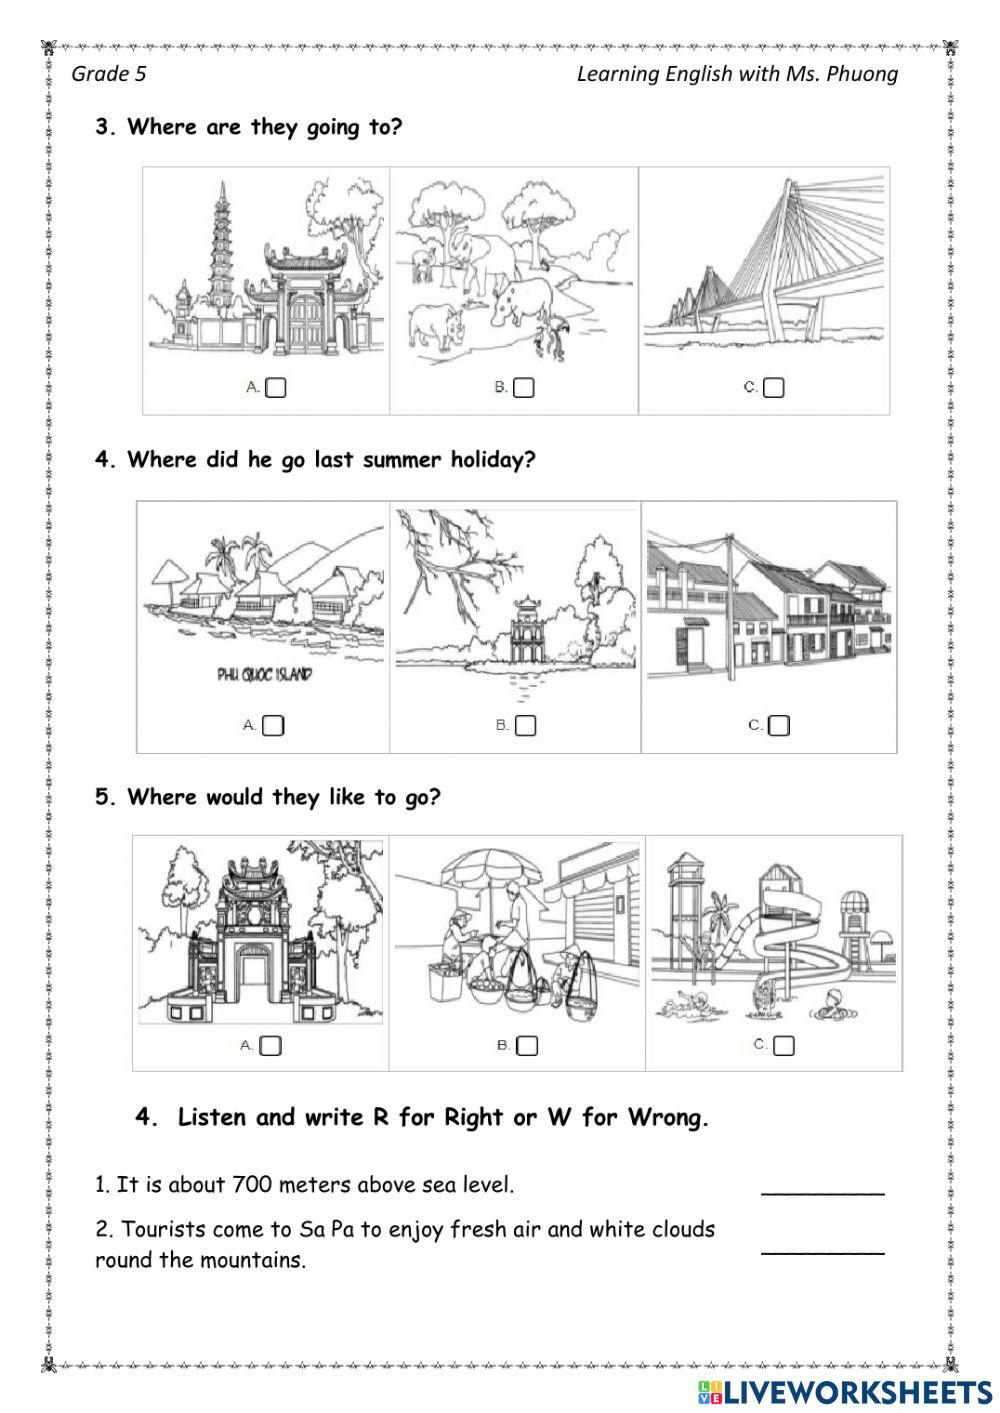 English 5- The 2nd term test